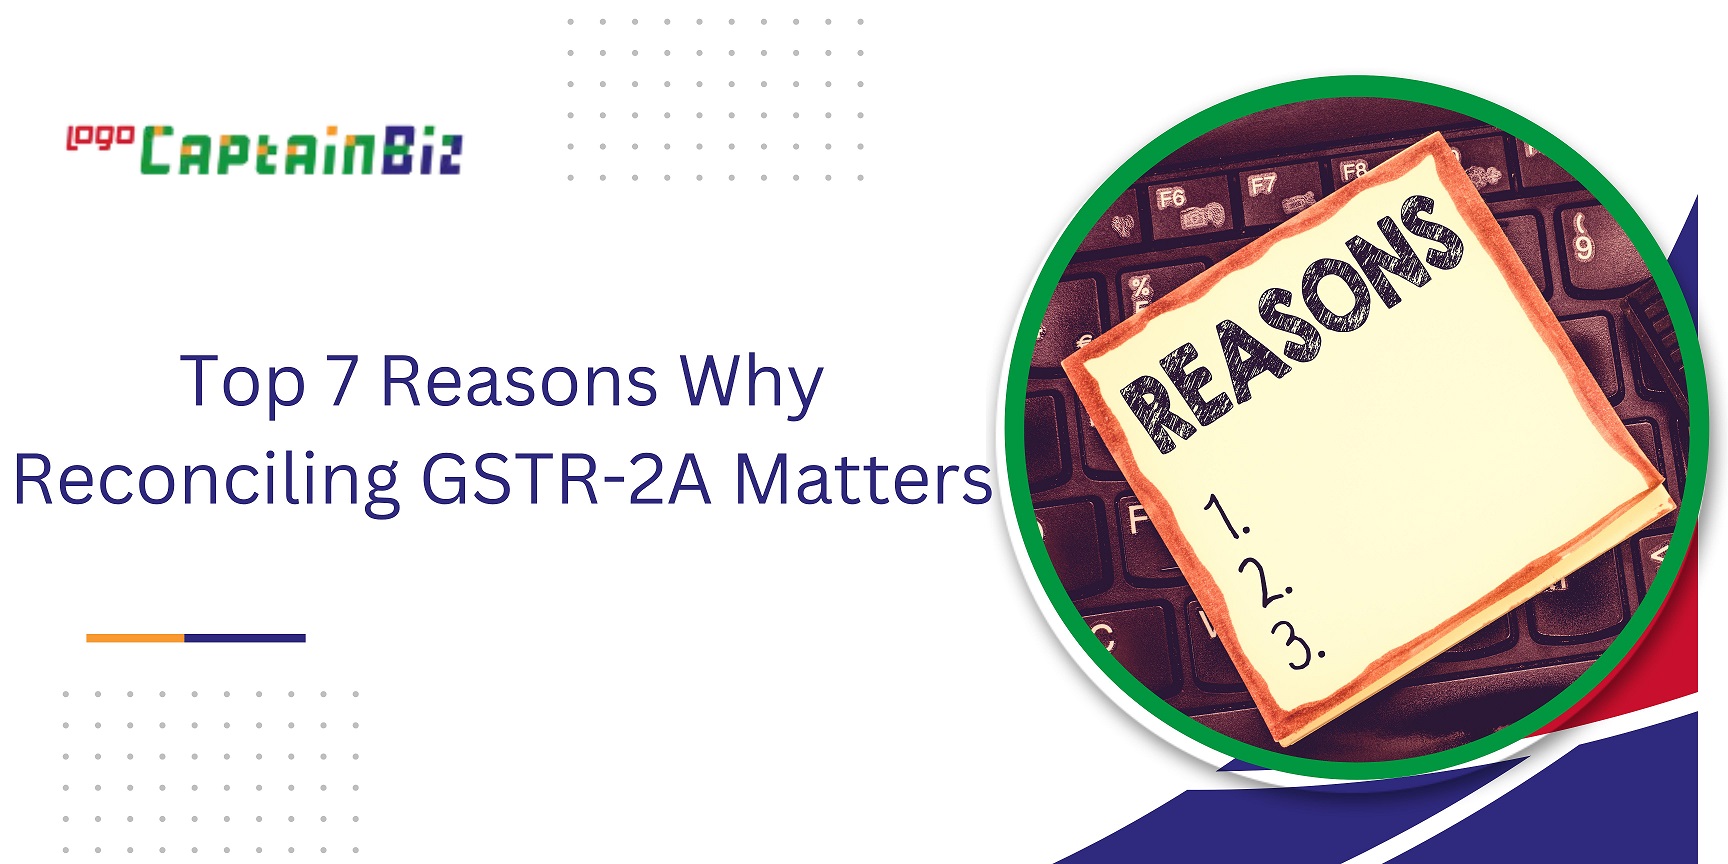 CaptainBiz: Top 7 Reasons Why Reconciling GSTR-2A Matters